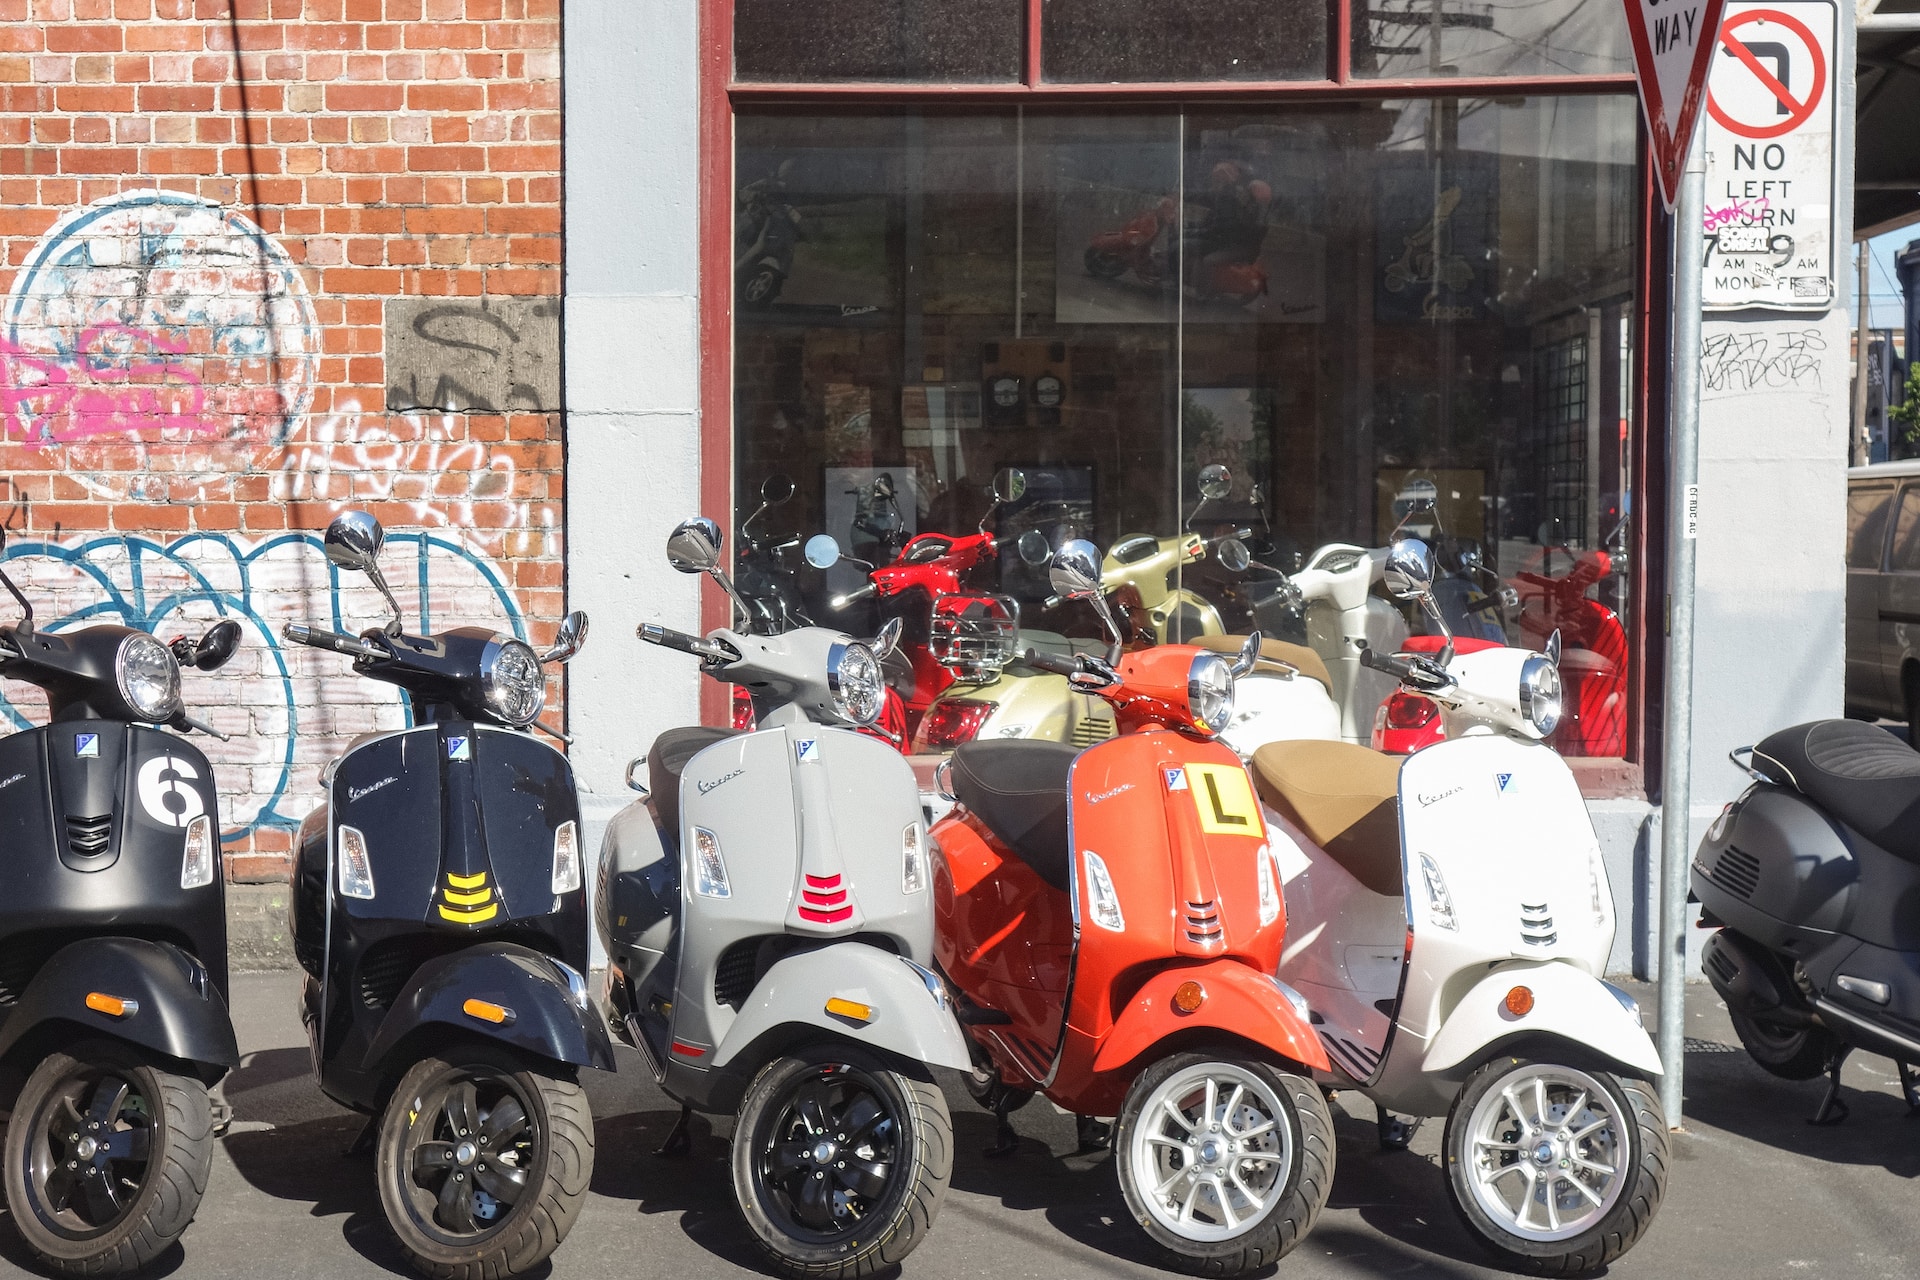 A row of mopeds parked on a corner